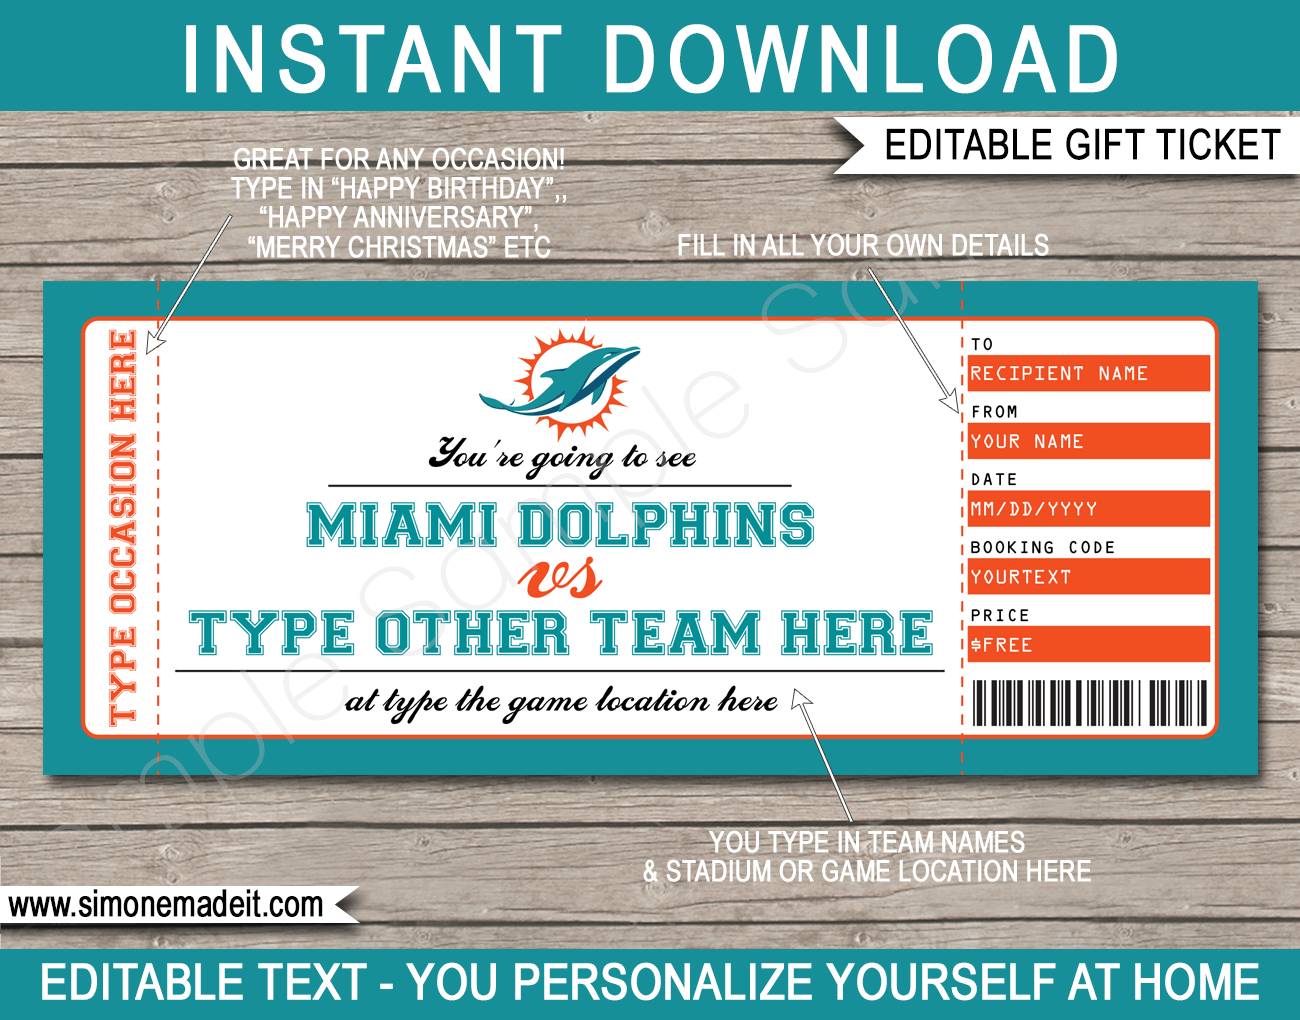 Miami Dolphins 2023-24 home game tickets: Where to buy & schedule